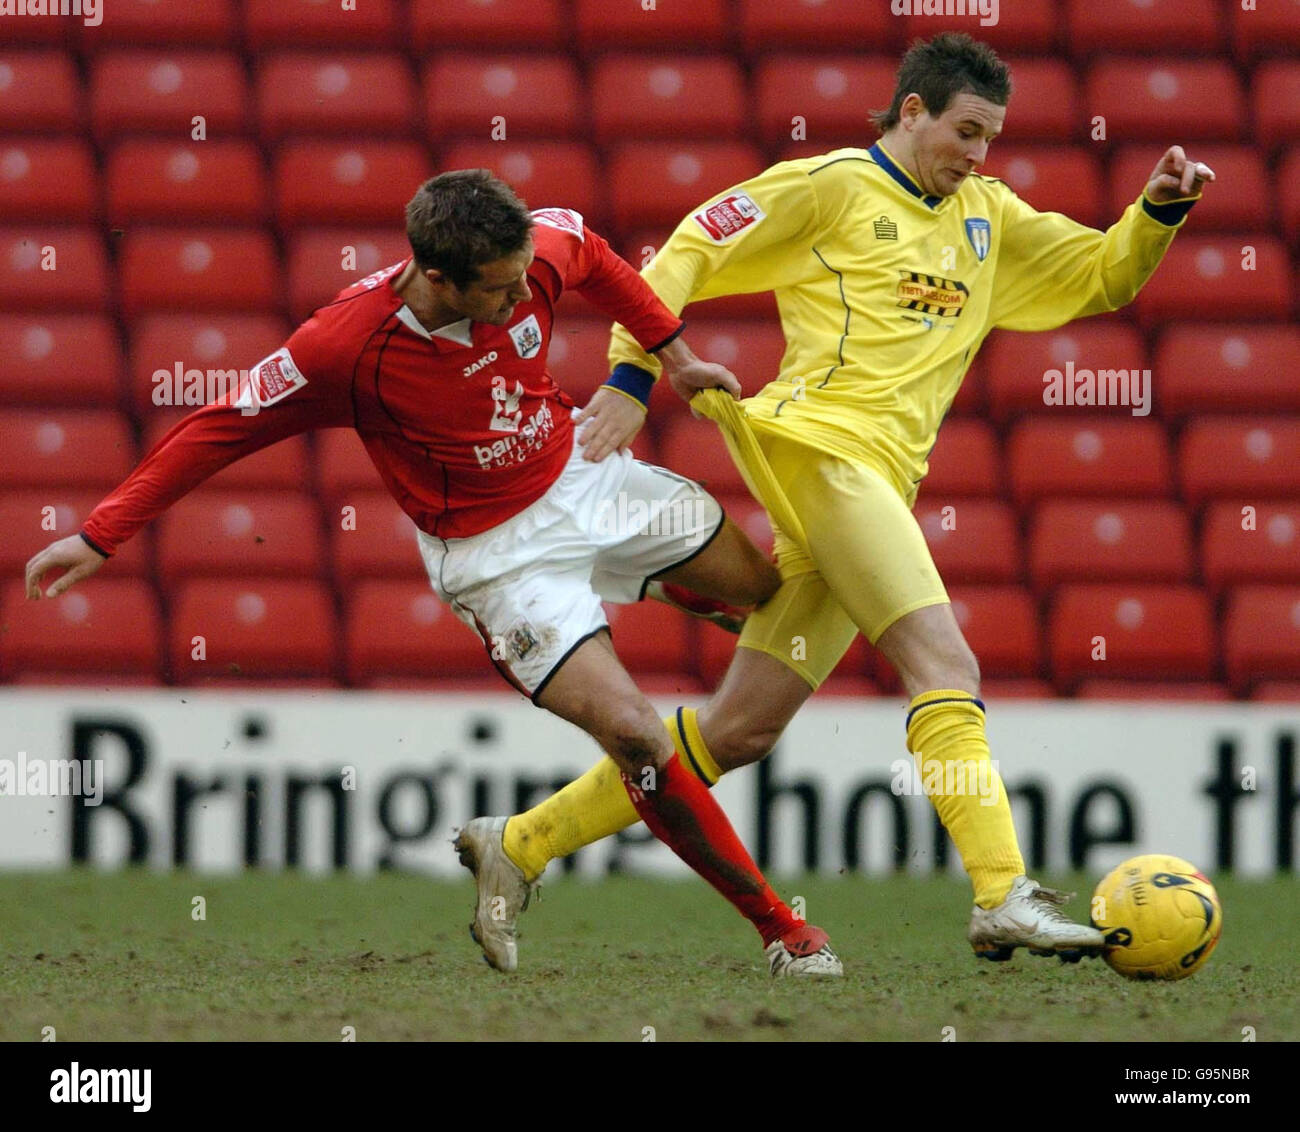 Barnsley's Stephen McPhail (L) pulls on Colchester's Mark Yeates during the Coca-Cola League One match at Oakwell Stadium, Barnsley, Saturday February 25, 2006. PRESS ASSOCIATION Photo. Photo credit should read: PA NO UNOFFICIAL CLUB WEBSITE USE. Stock Photo